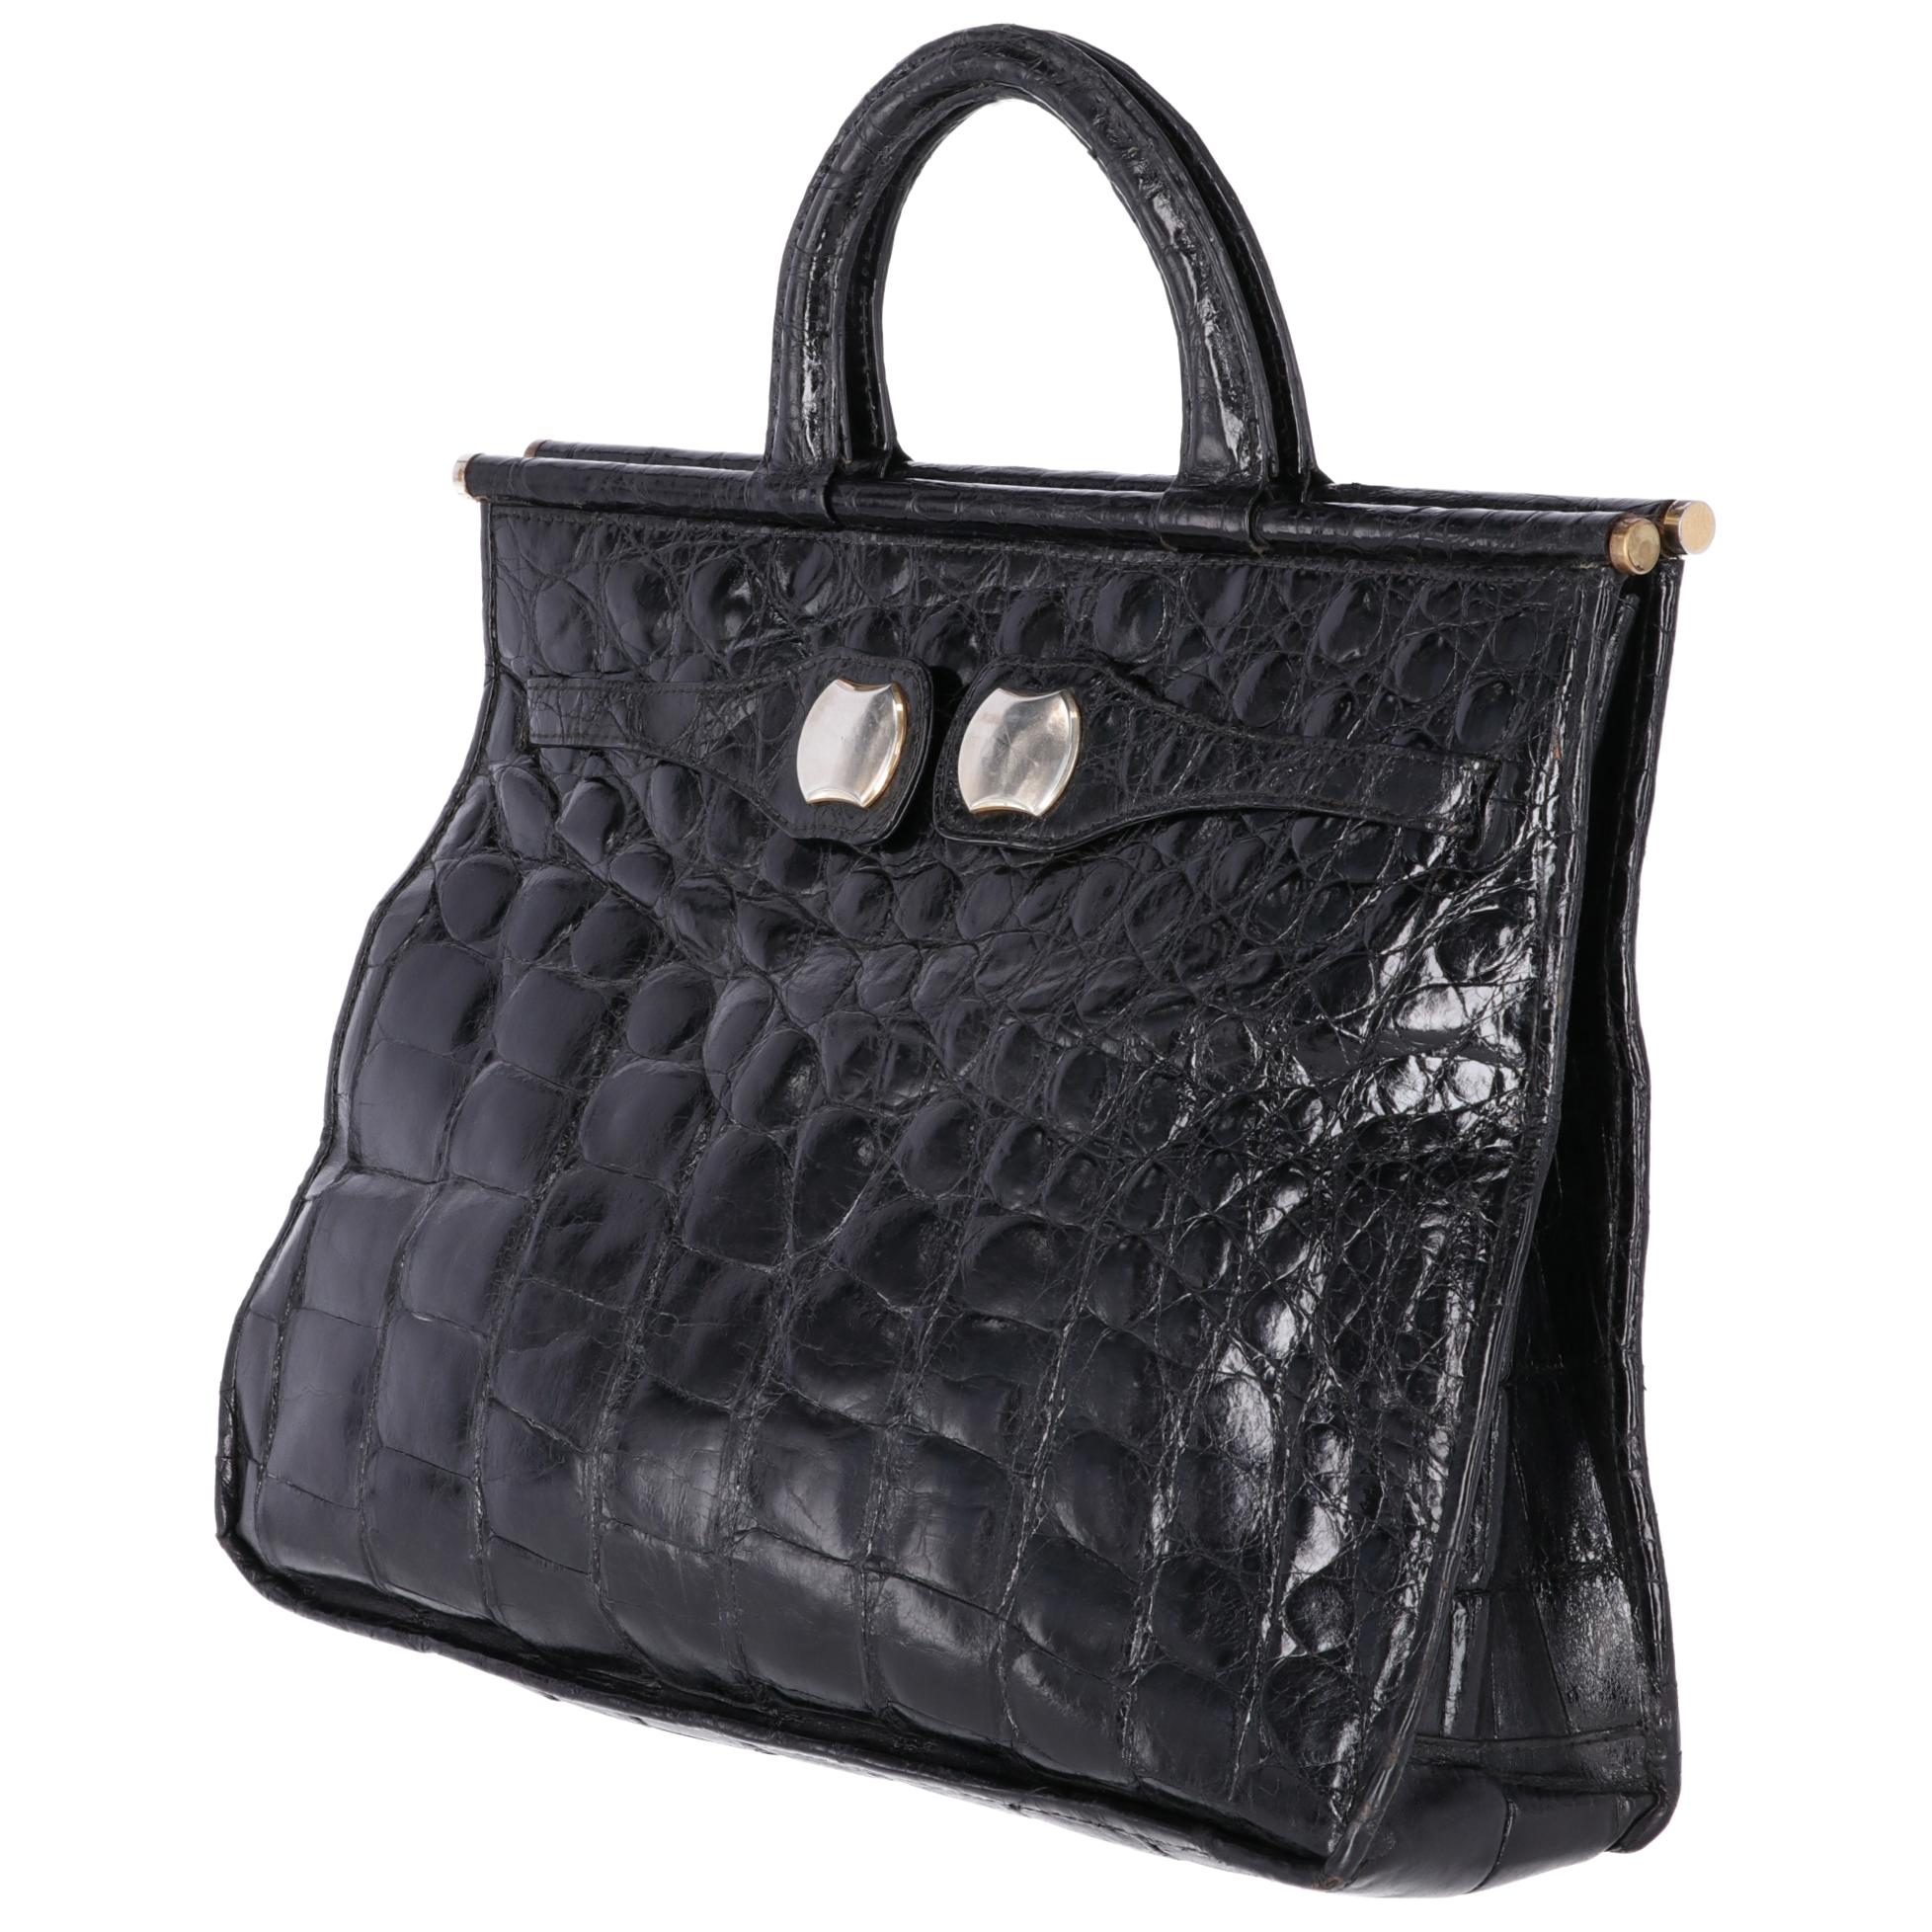 Black polished crocodile skin tote bag, with round and rigid handles, front closure with two tapes with magnetic metal insert, large internal compartment and two pockets, one with a snap button and one with a zip.

The bag shows light signs on the